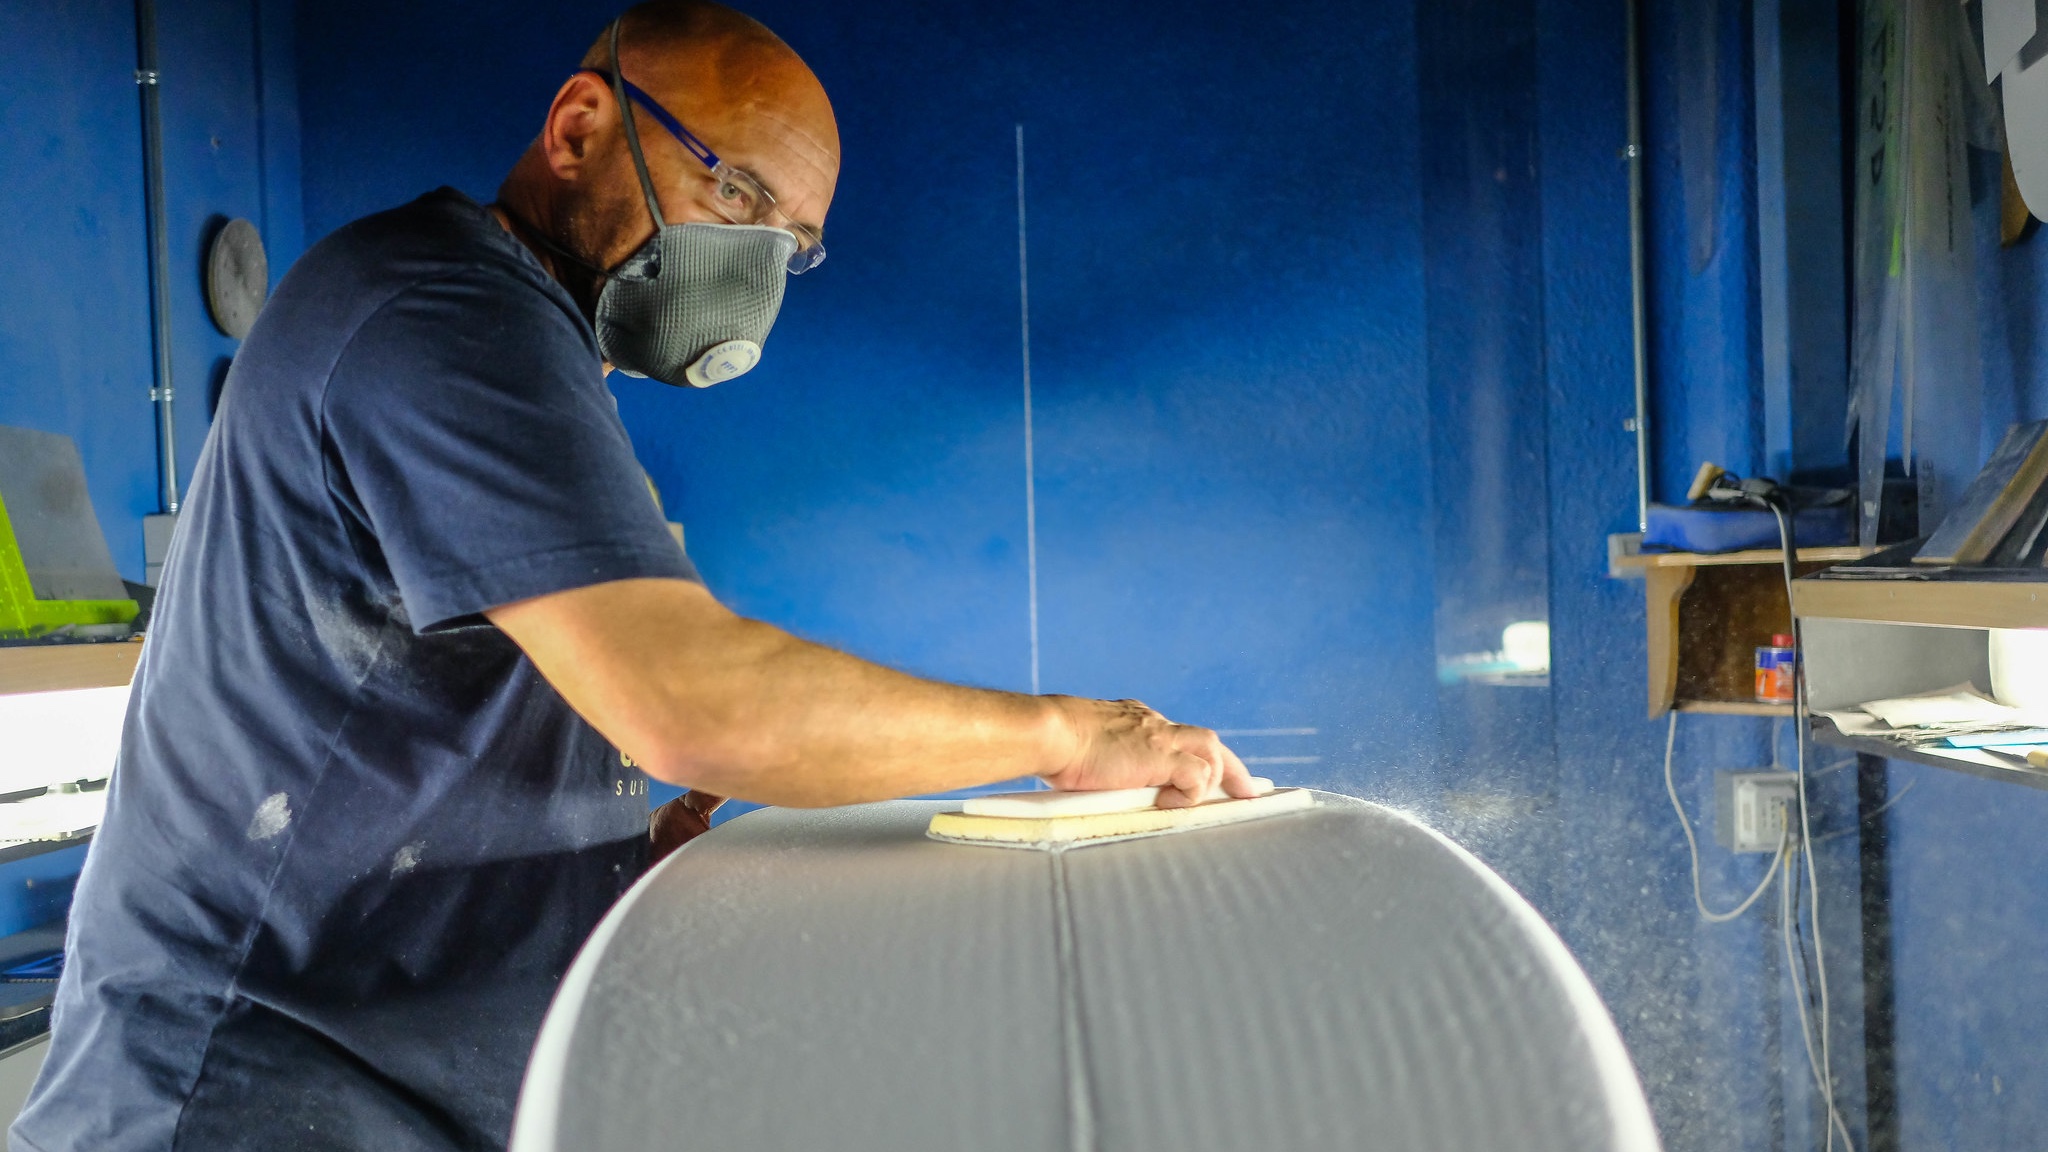 Johnny Cabianca shaping surfboard